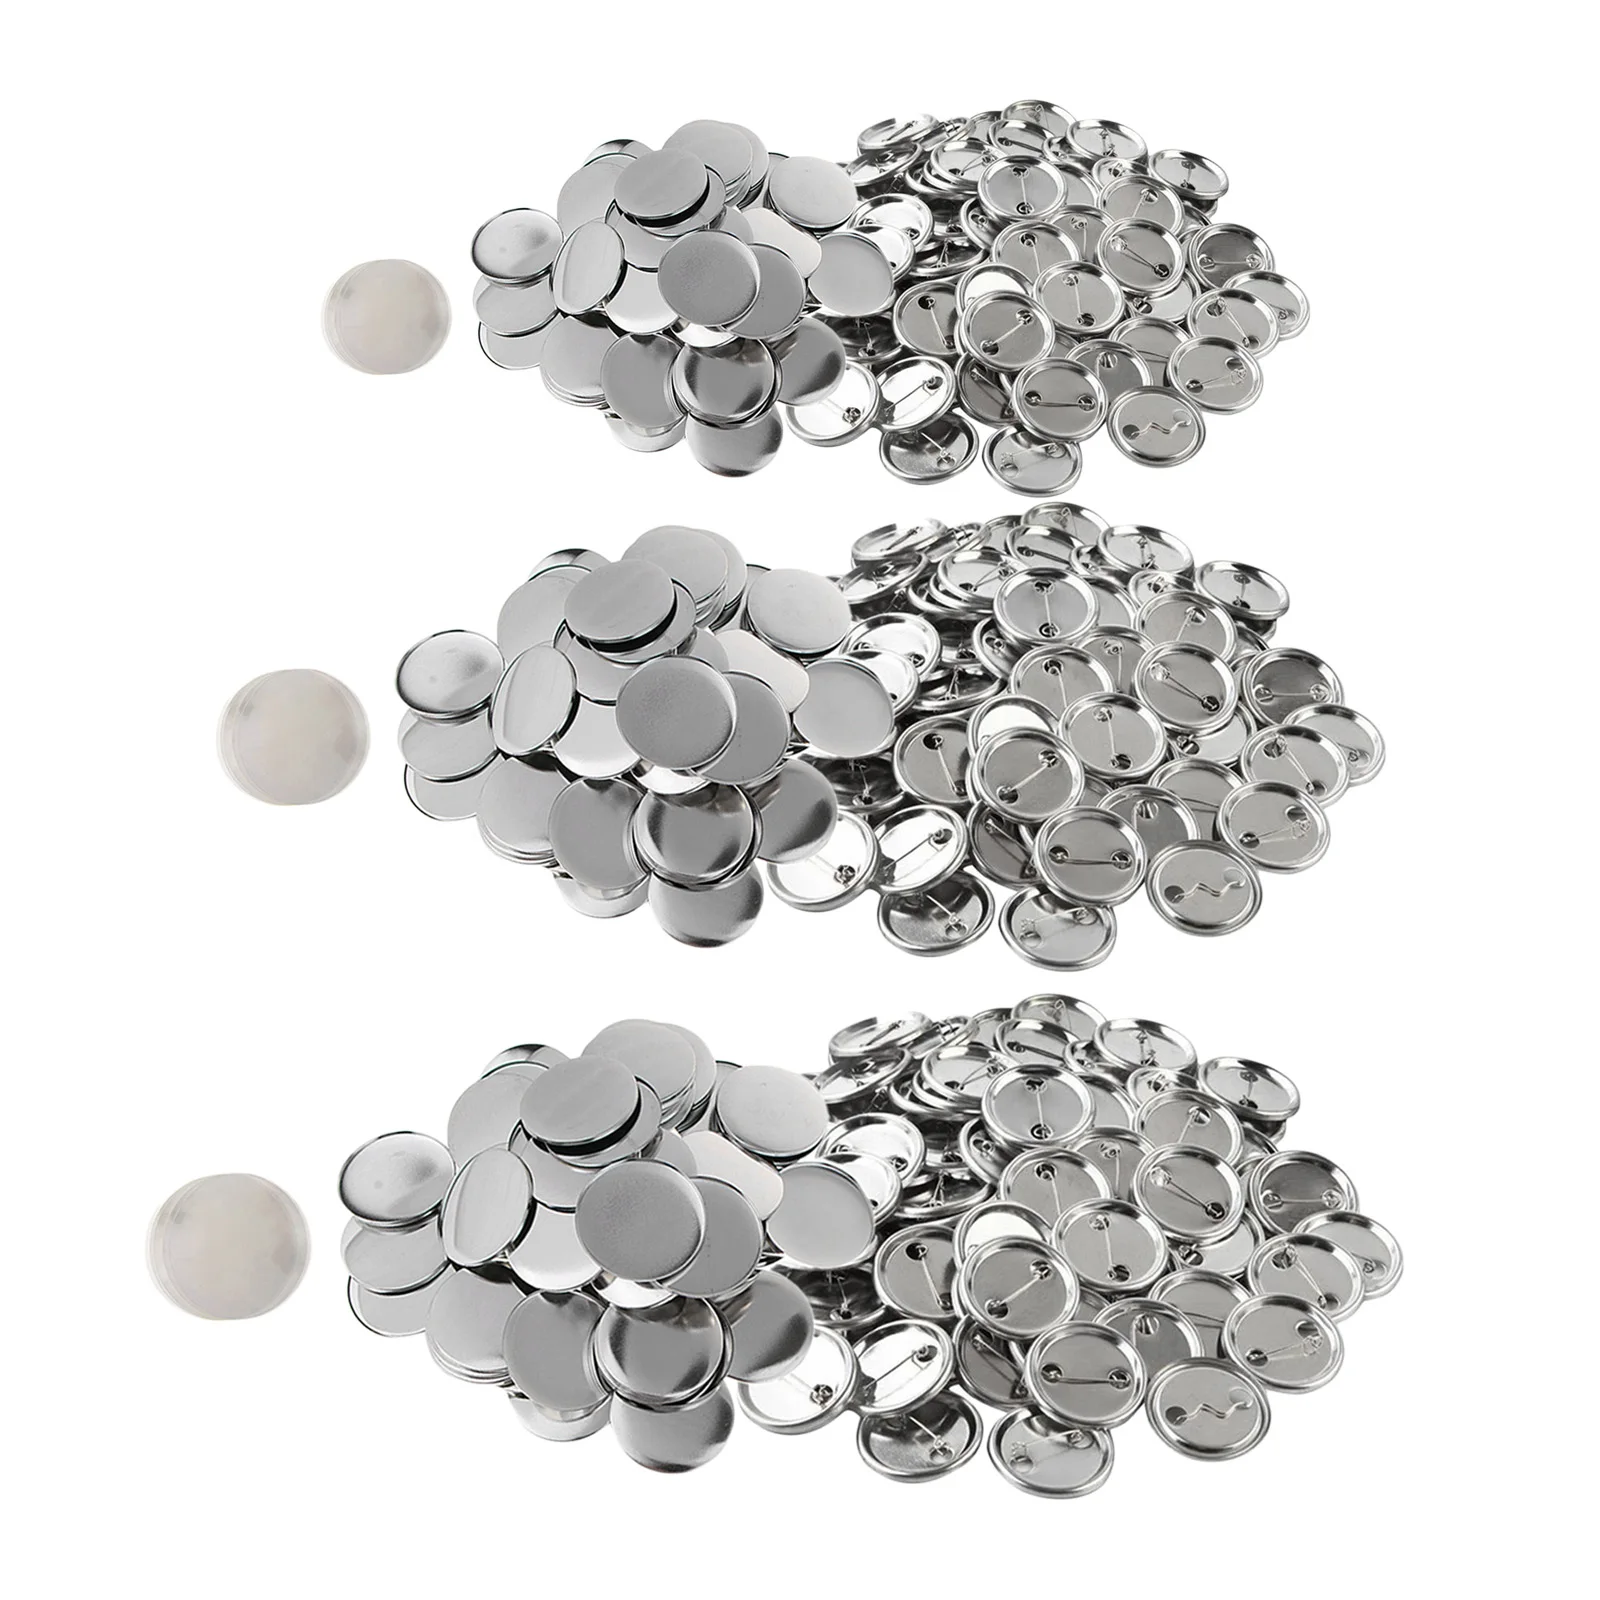 75mm/37mm/ 25mm Round Blank Button Badge Supplies DIY Jewelry Making Component for Crafts Lovers